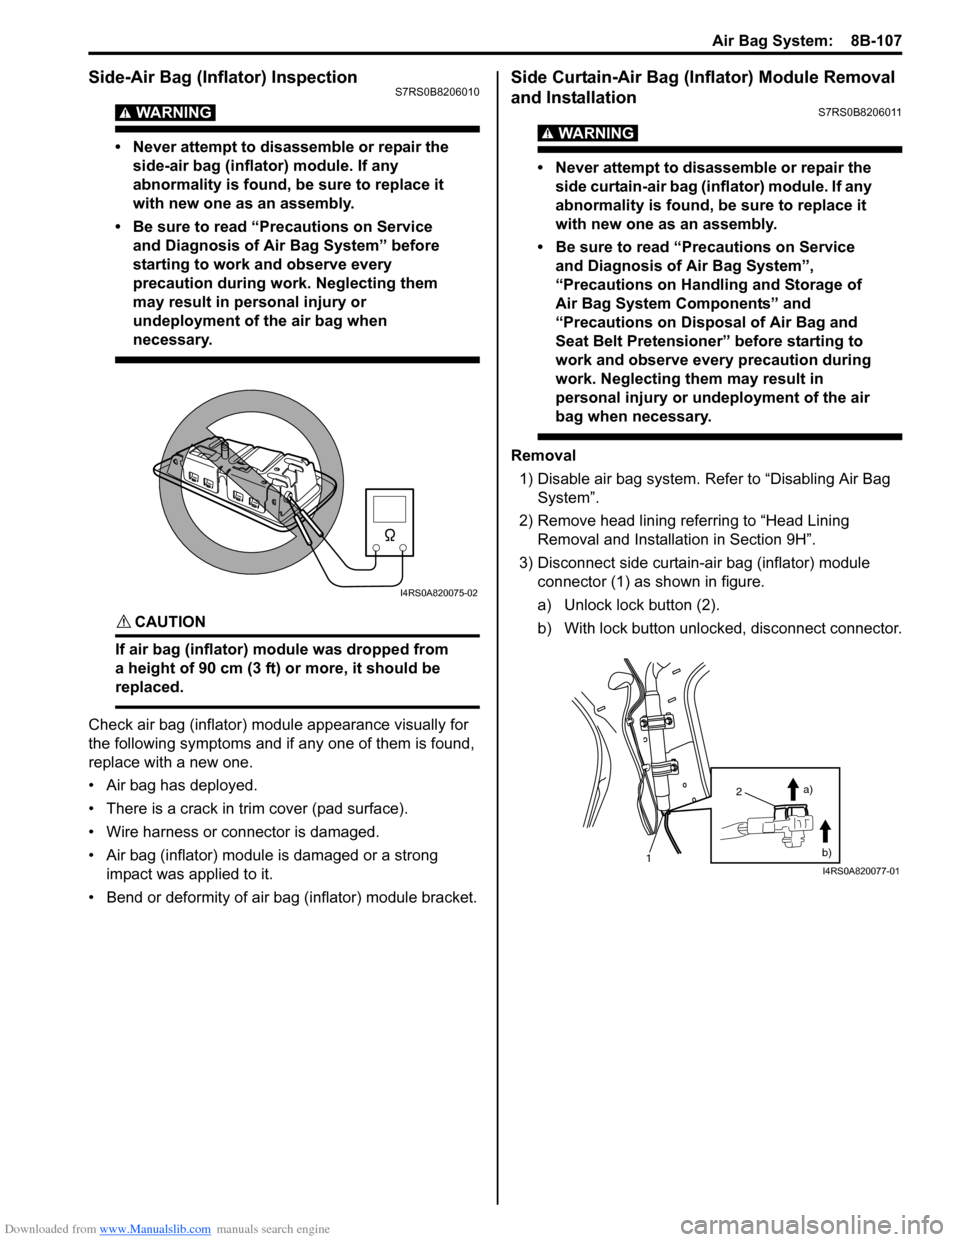 SUZUKI SWIFT 2006 2.G Service Manual PDF Downloaded from www.Manualslib.com manuals search engine Air Bag System:  8B-107
Side-Air Bag (Inflator) InspectionS7RS0B8206010
WARNING! 
• Never attempt to disassemble or repair the side-air bag (